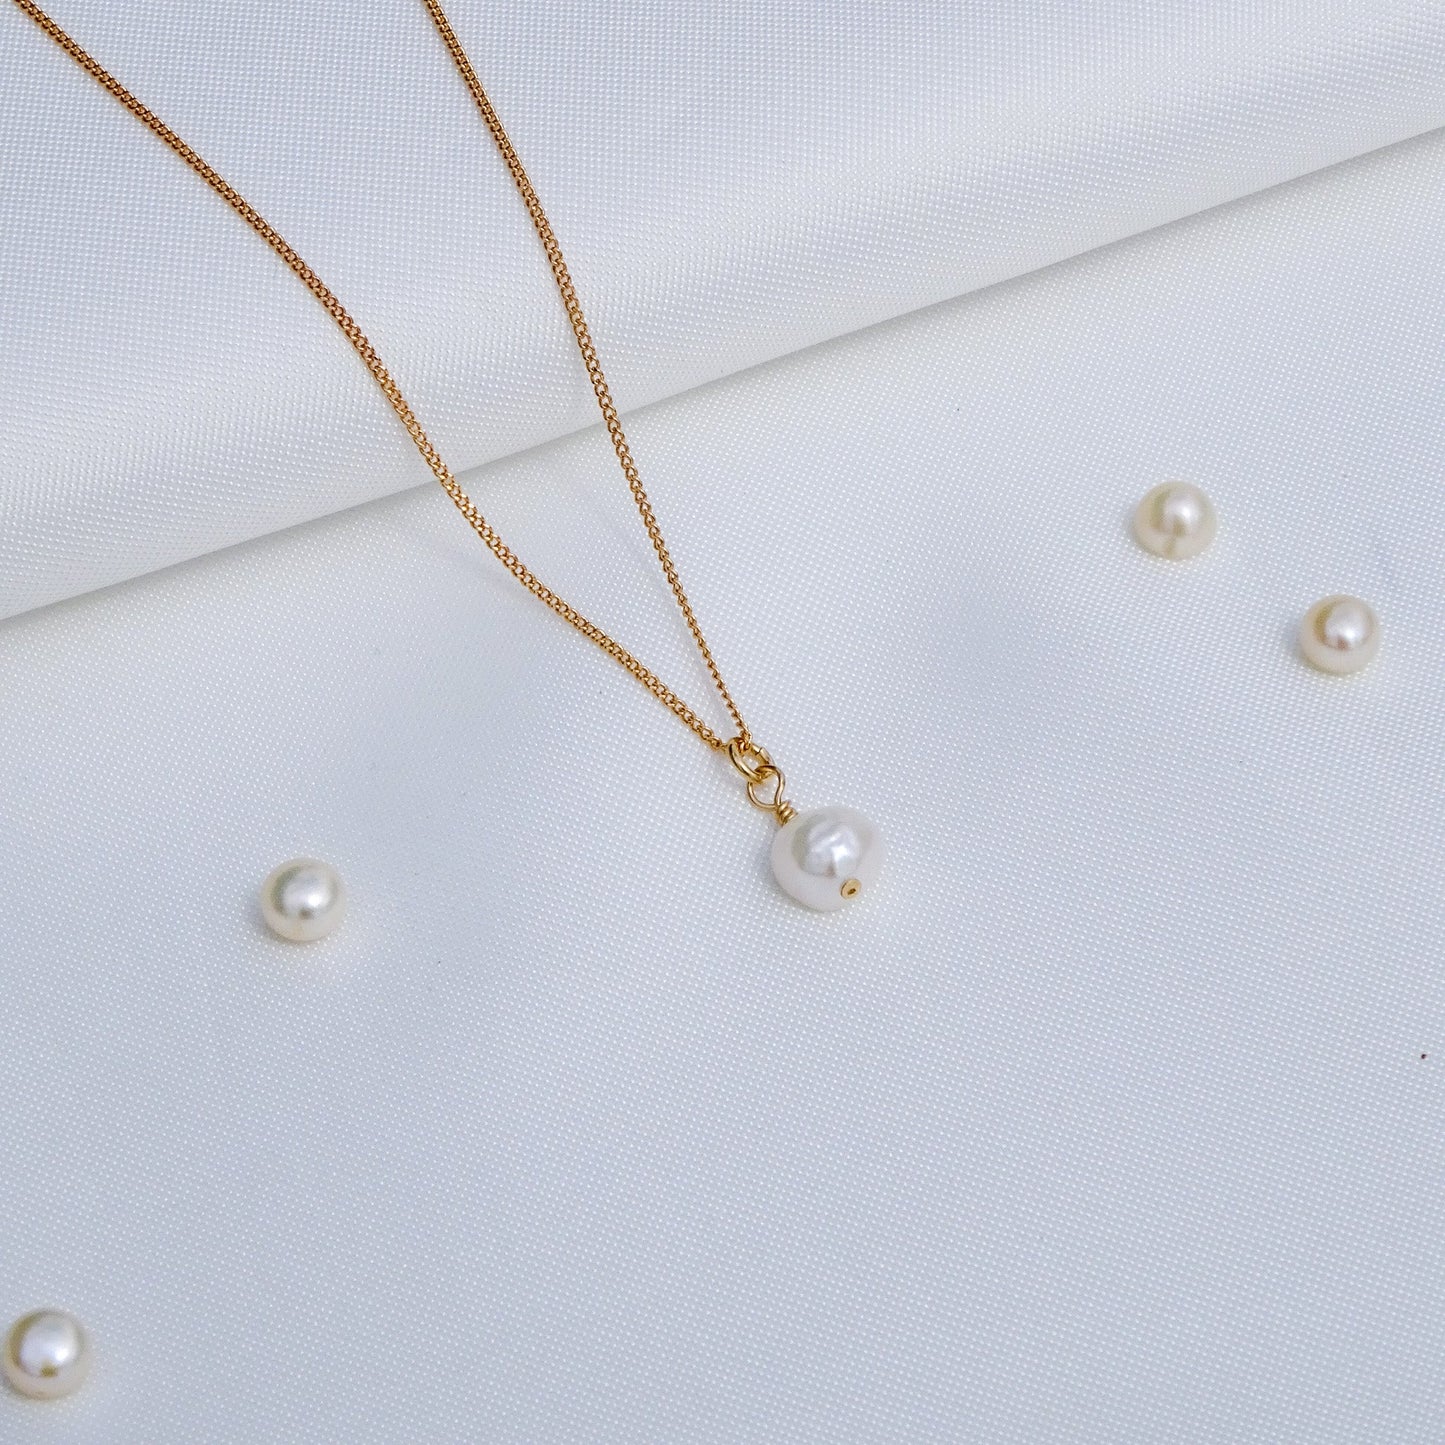 Gold Single Freshwater Pearl Necklace